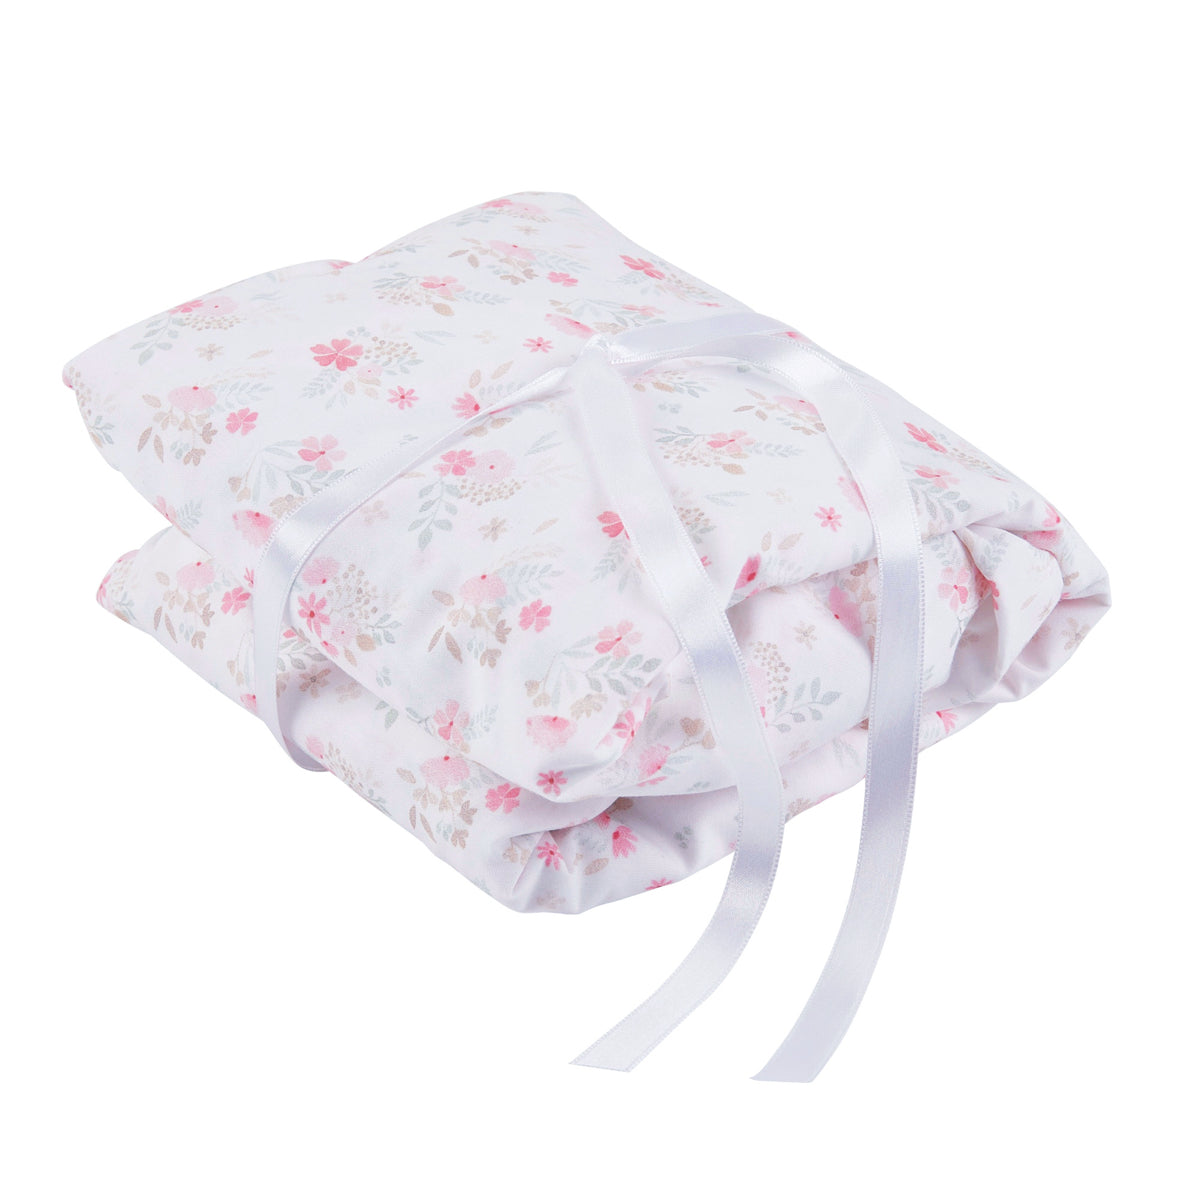 Theophile & Patachou Cot Bed Fitted Sheet 60 x 120 cm - Pink Flower